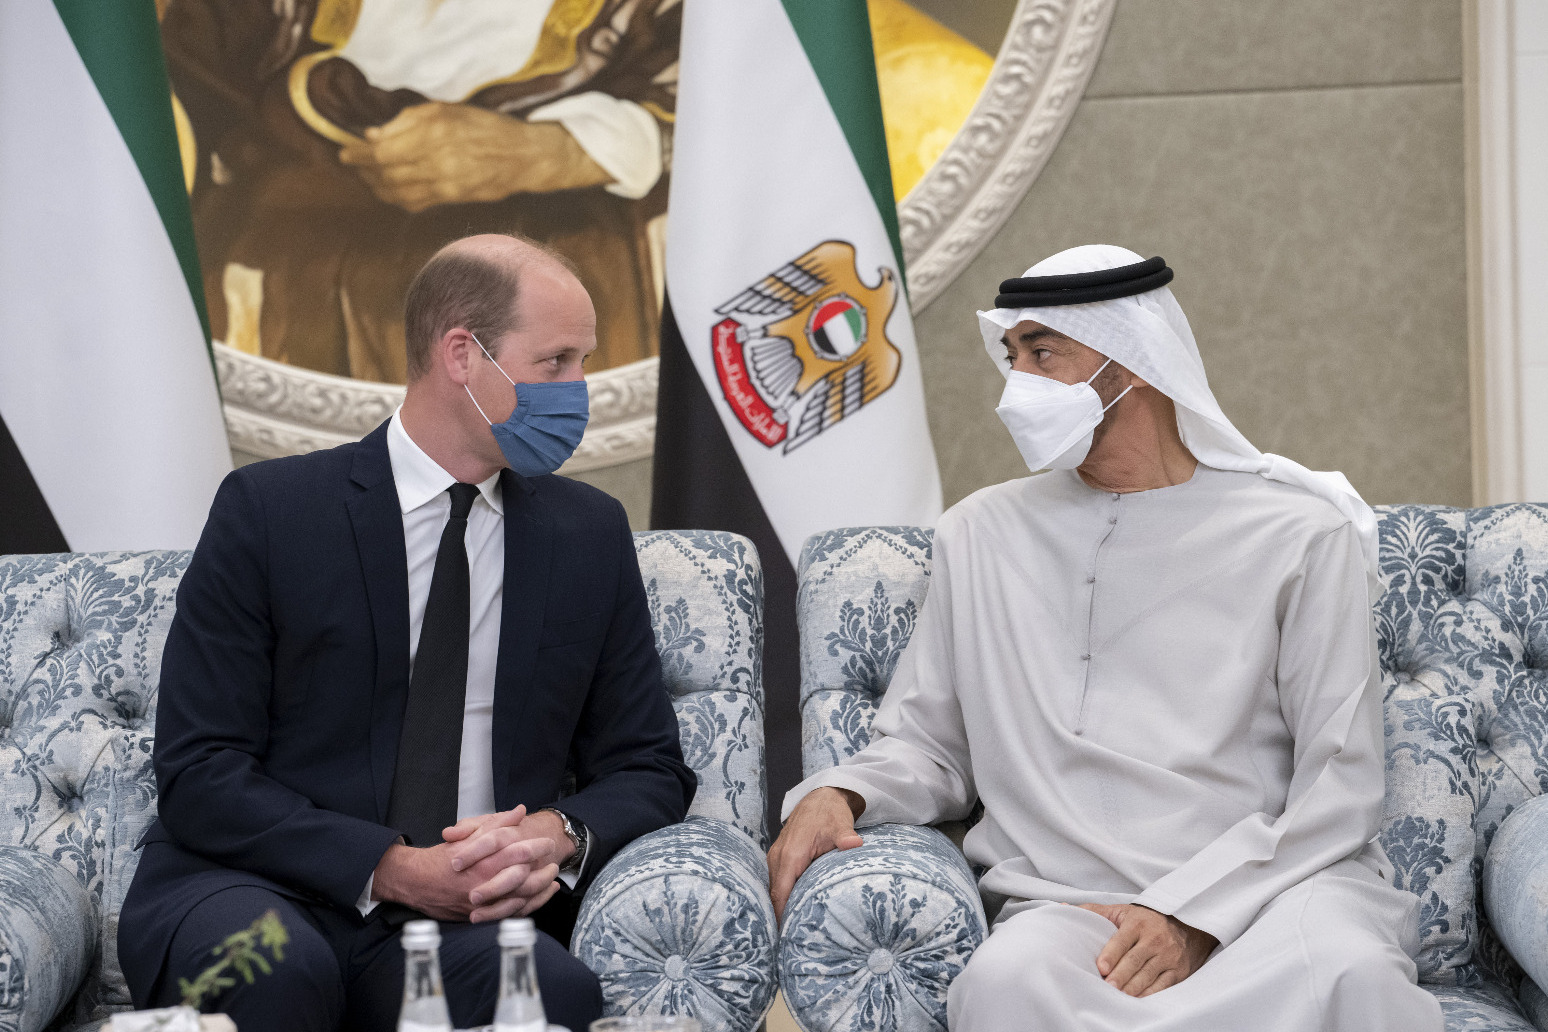 William pictured in UAE offering Queen’s condolences after ruler’s death 